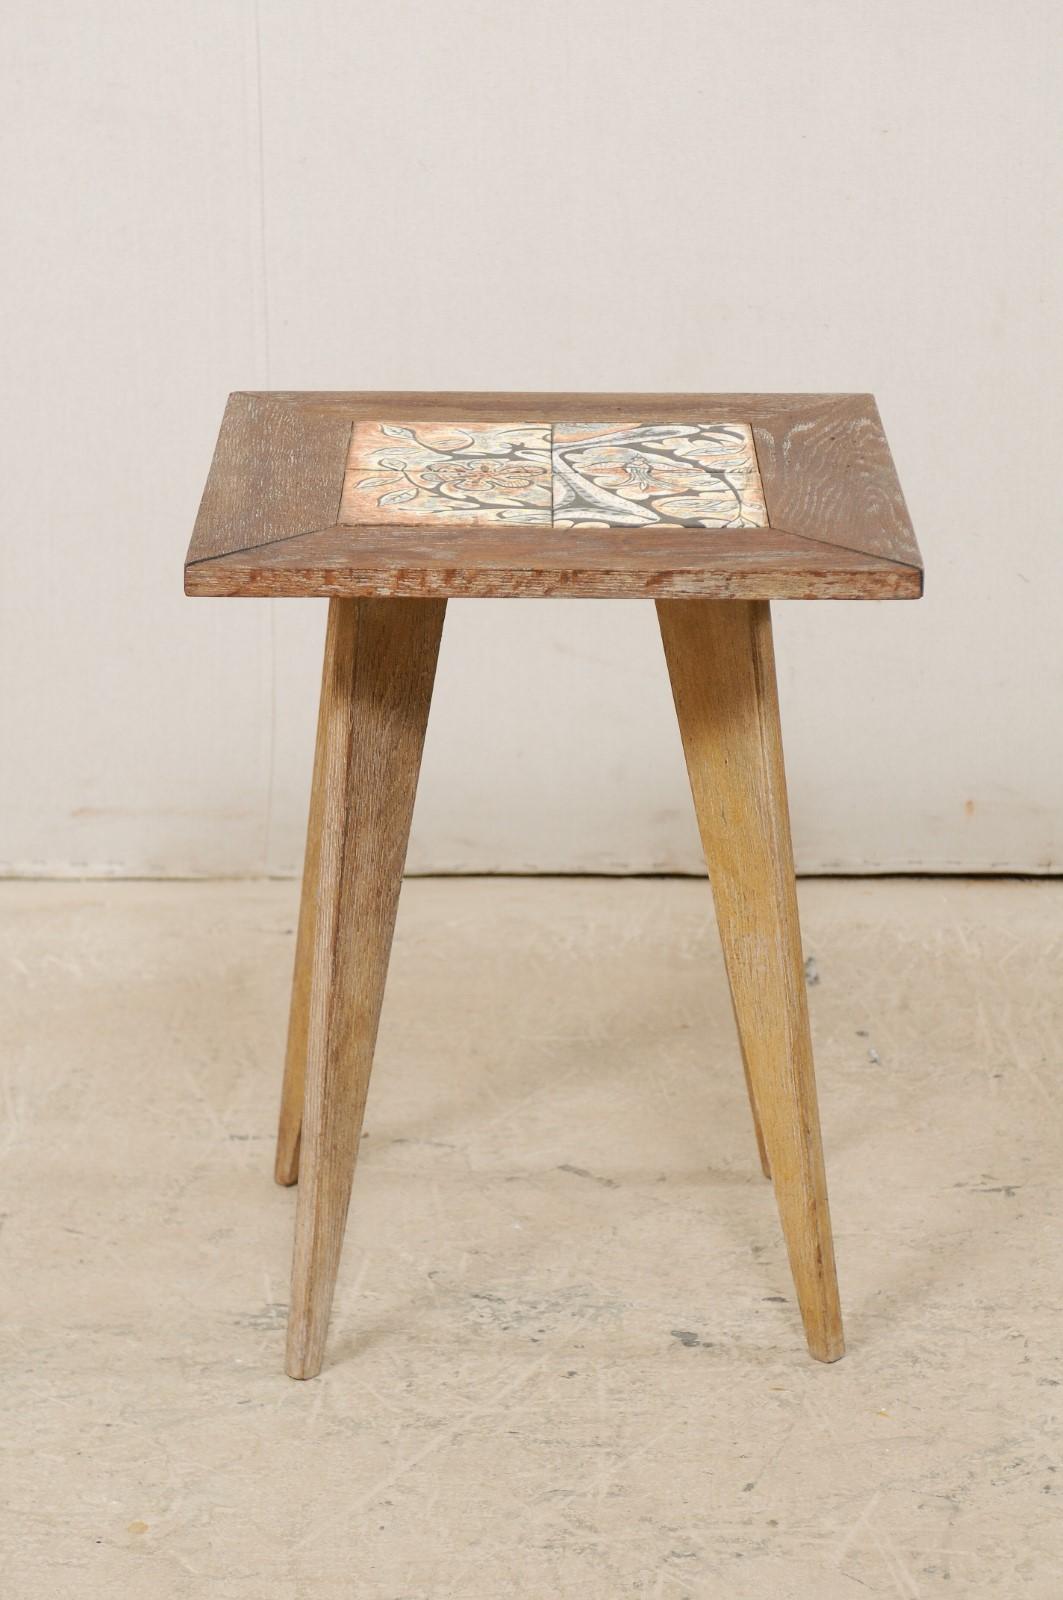 Mid-20th Century Midcentury Side Table with Painted Tile Top Attributed to Anton Refreiger